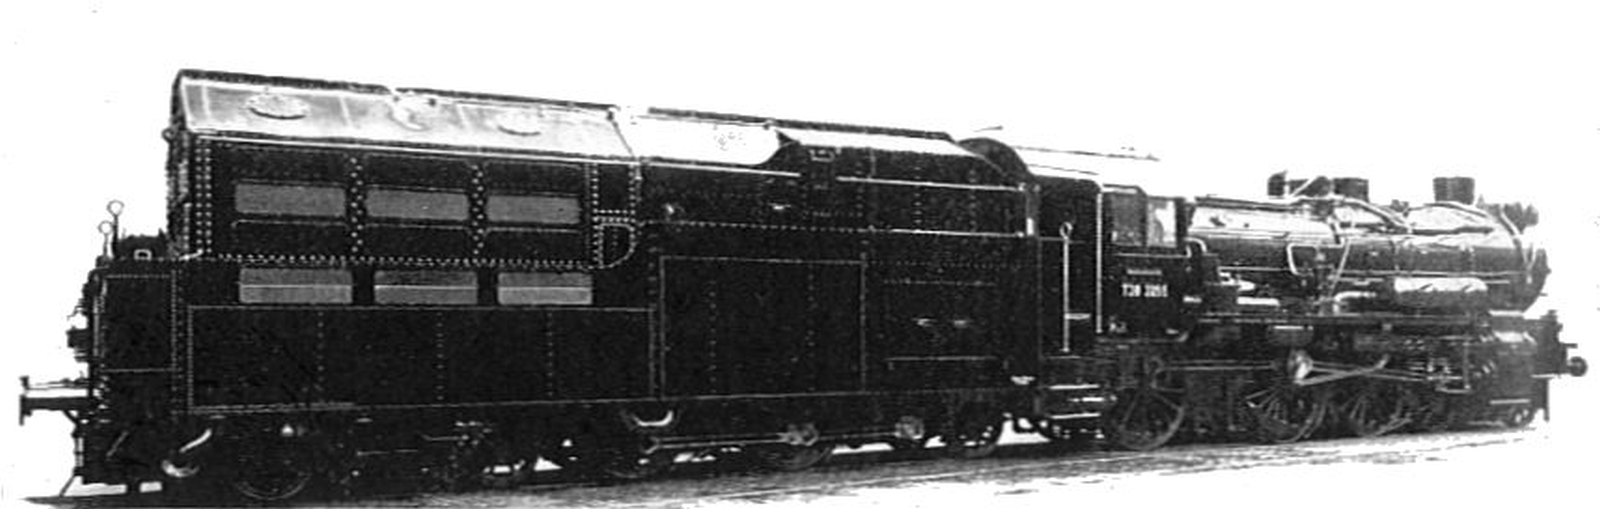 View of the powered tender with T 38 3255